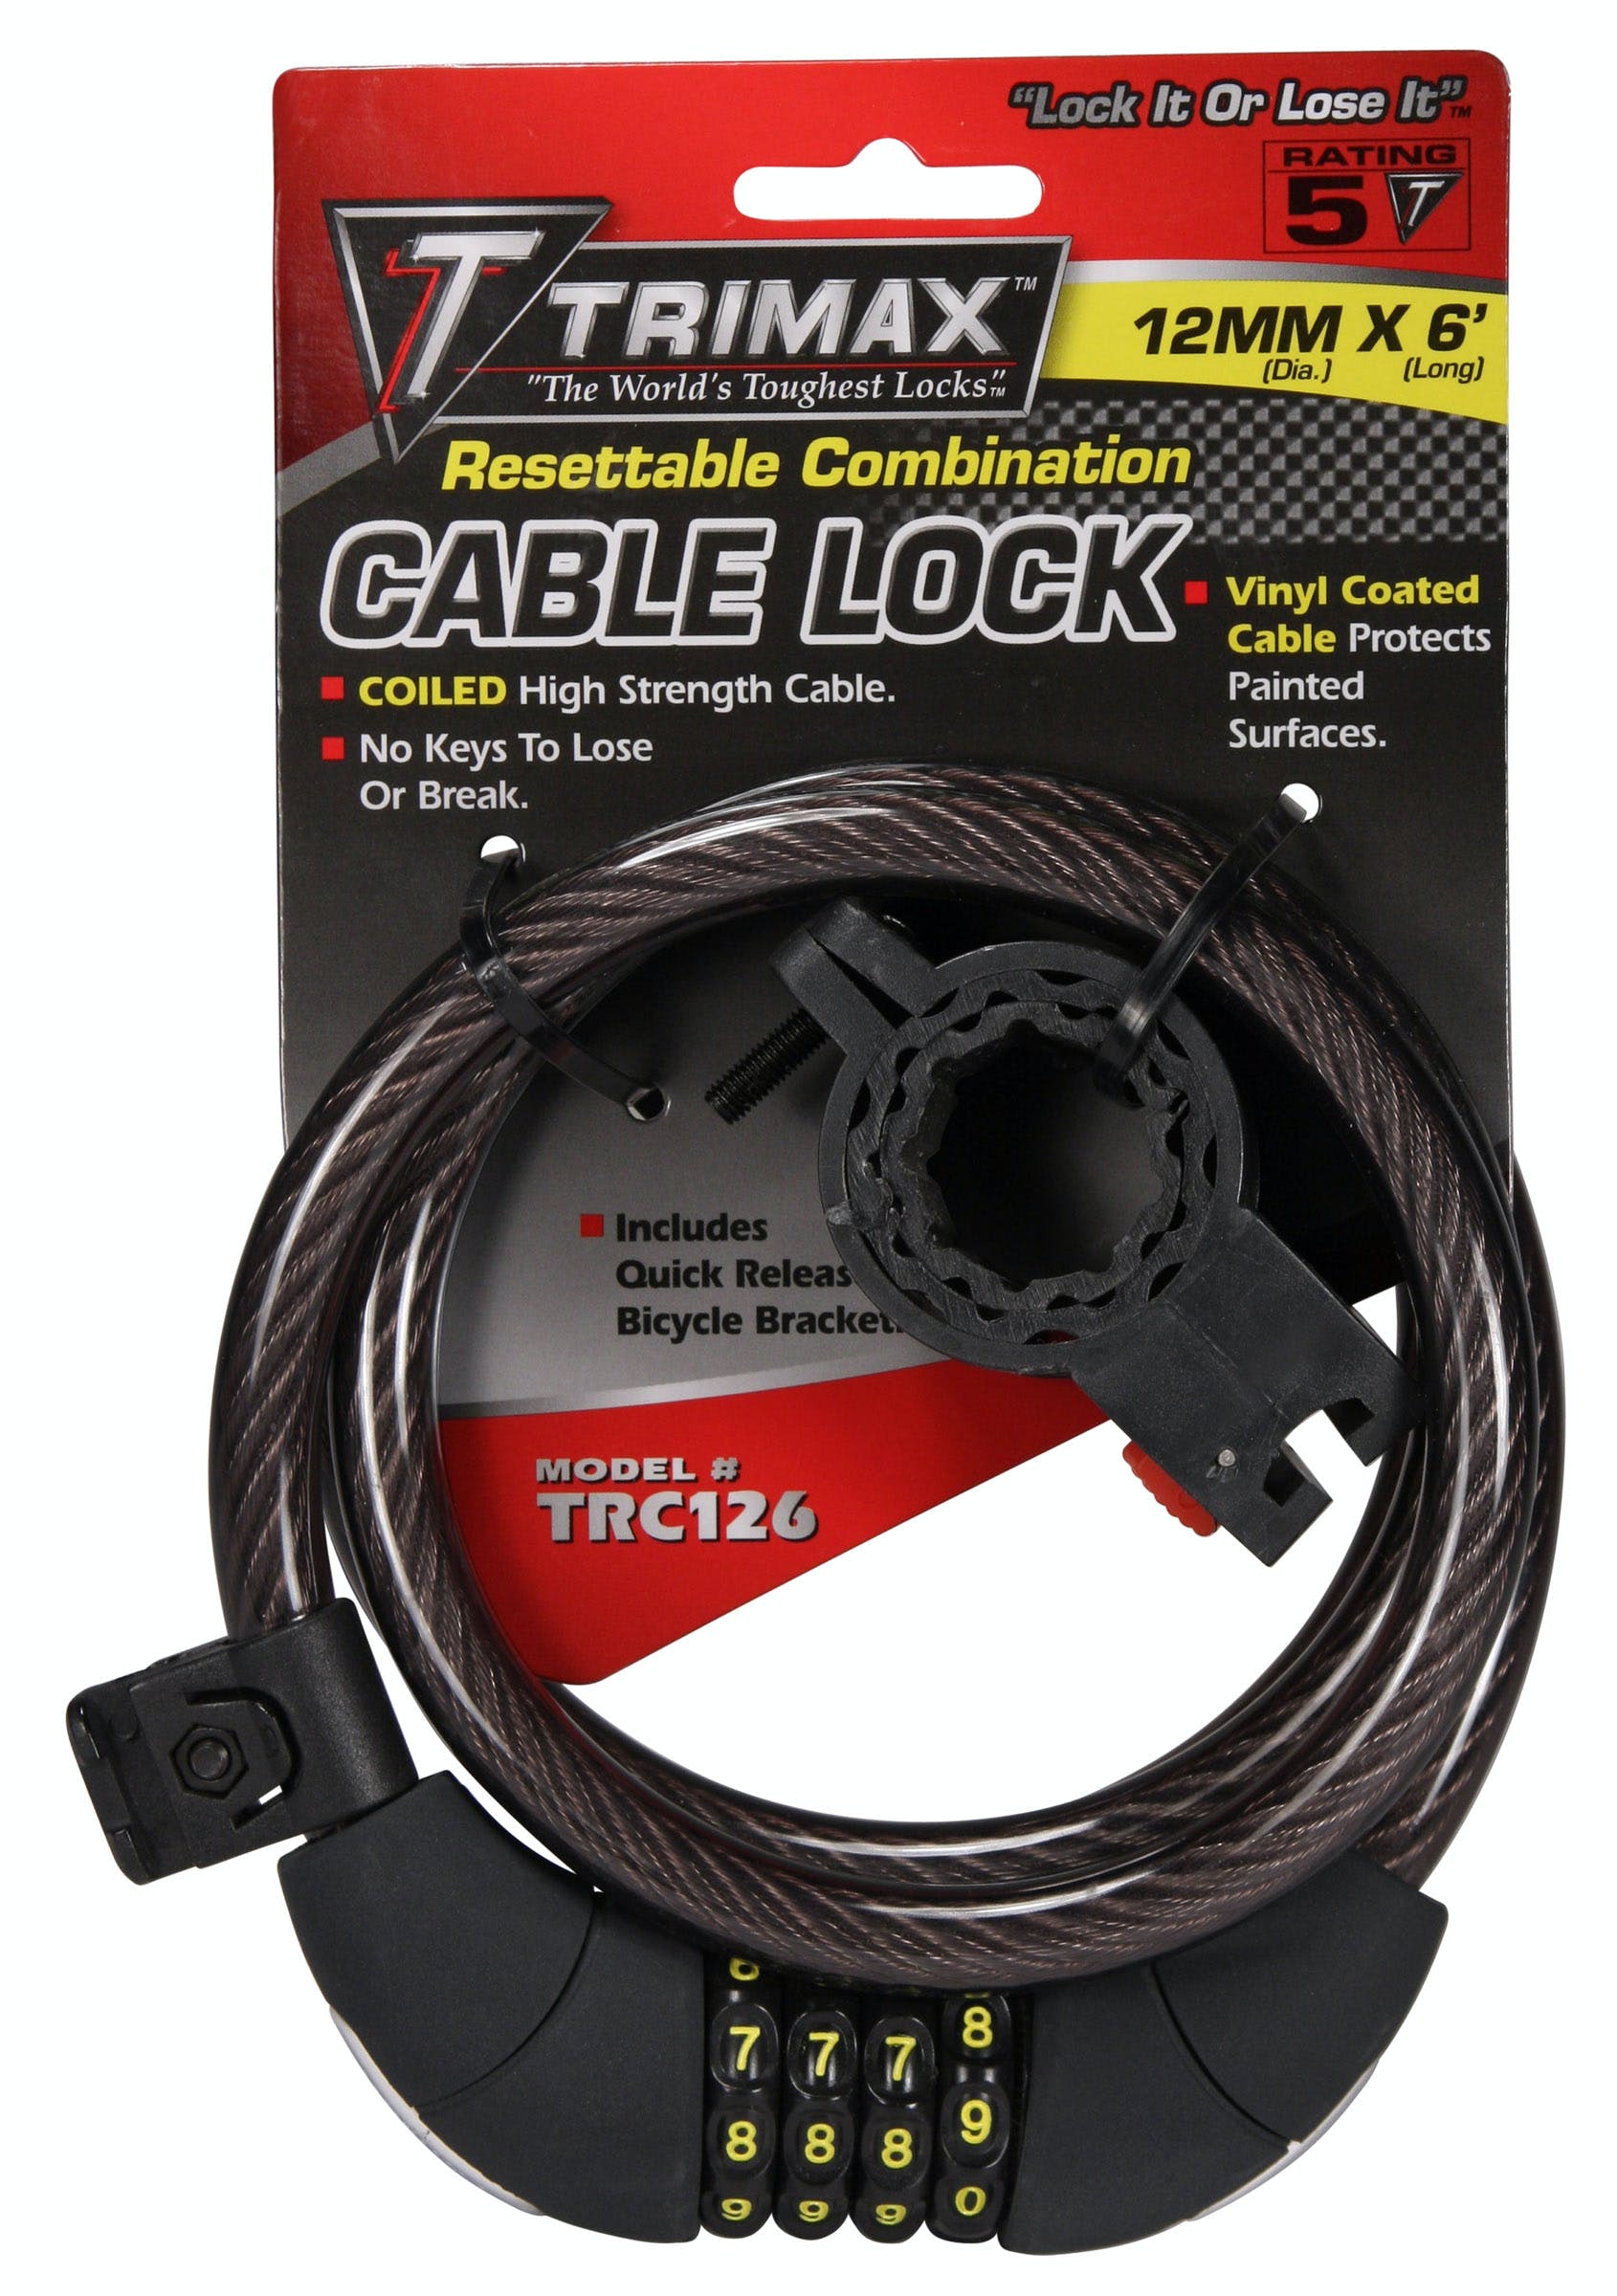 TRIMAX TRC126 Medium Security Resettable Combo with Bracket-Coiled 6 X 12mm